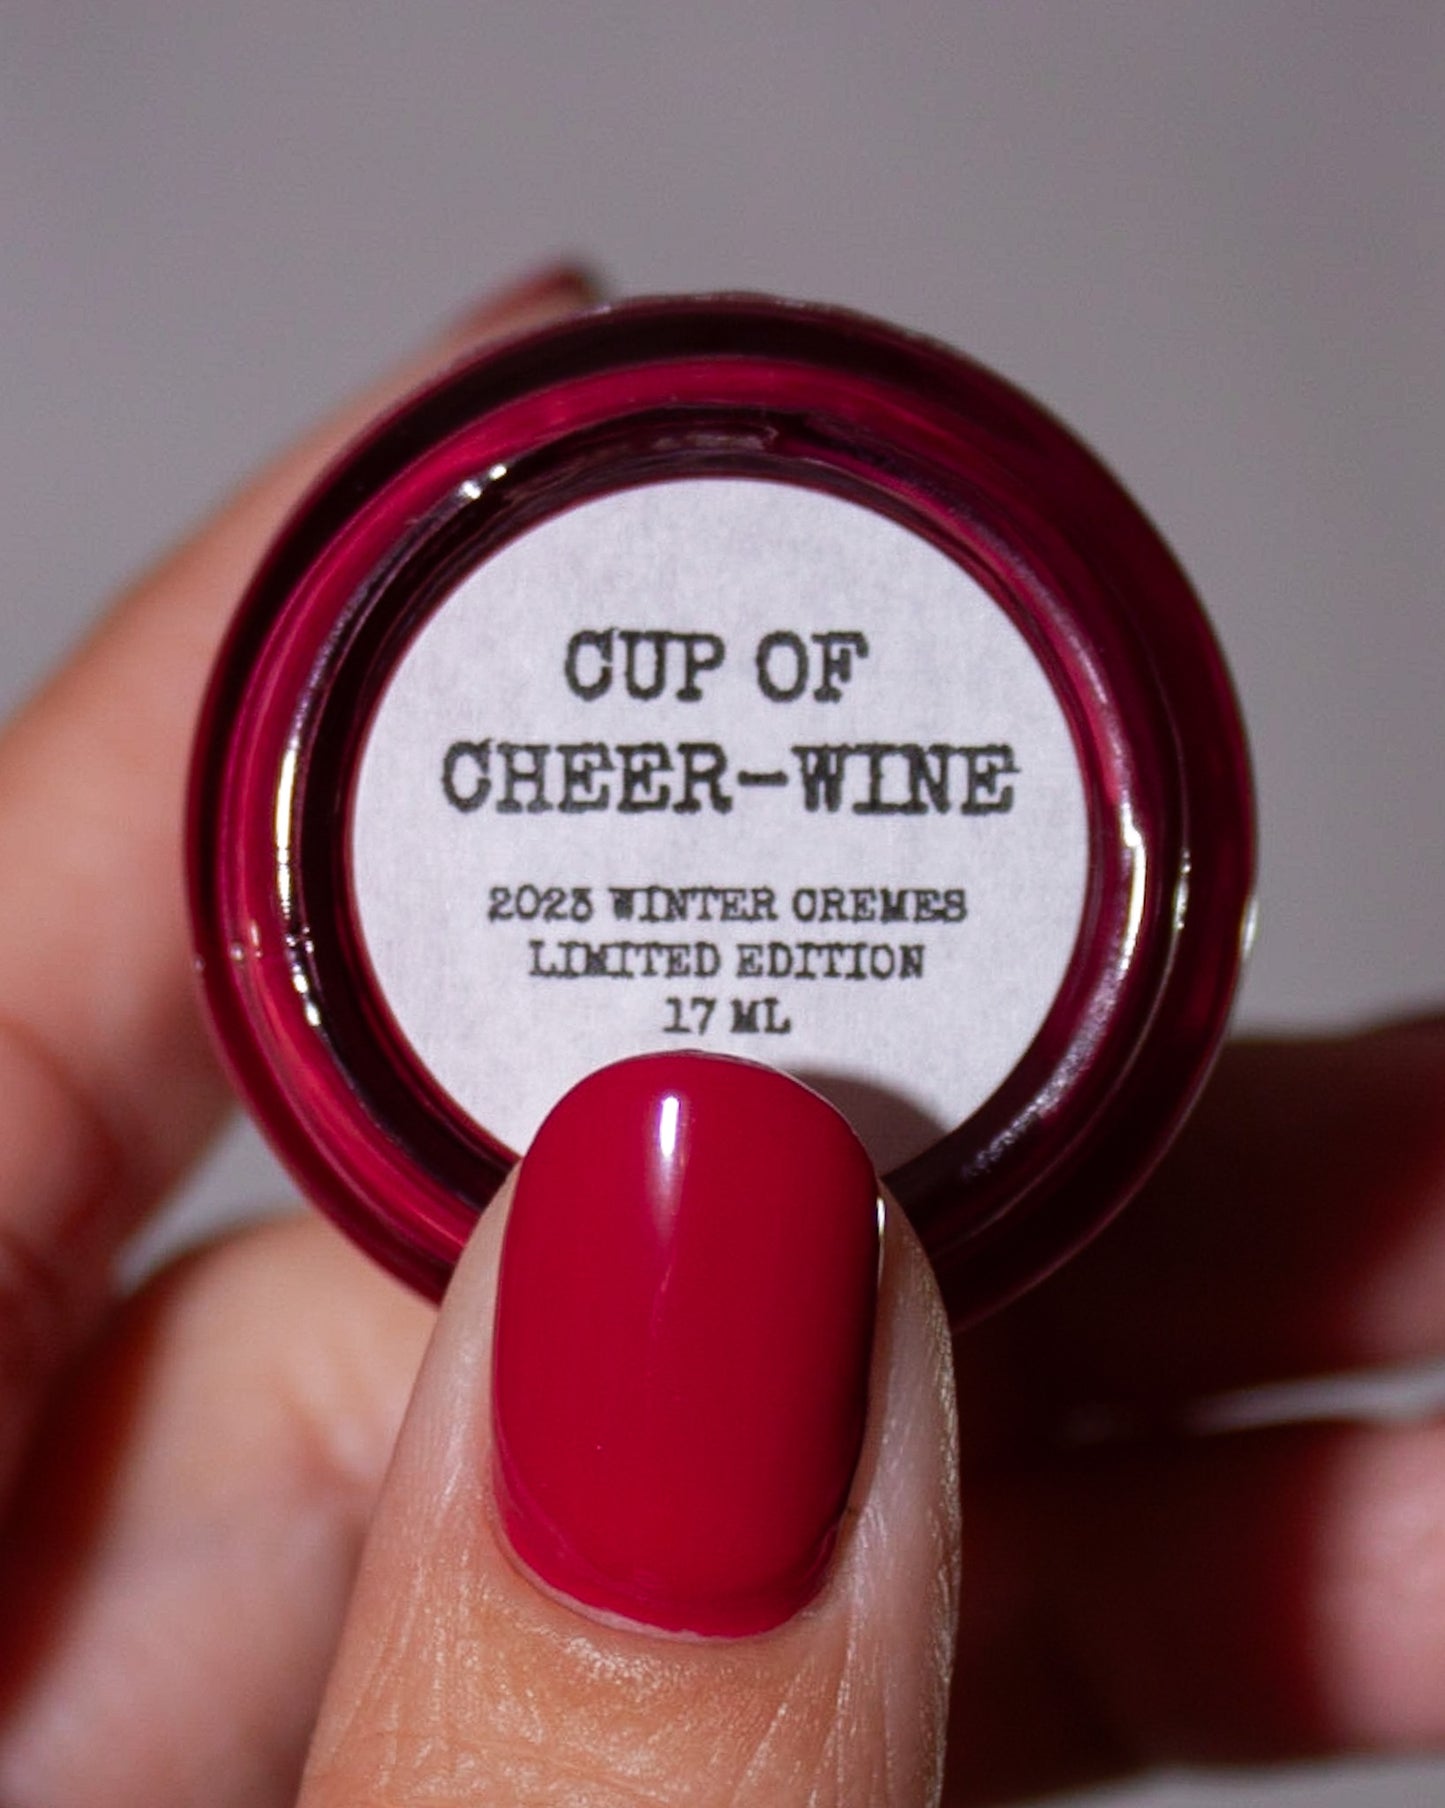 Cup of Cheer-Wine